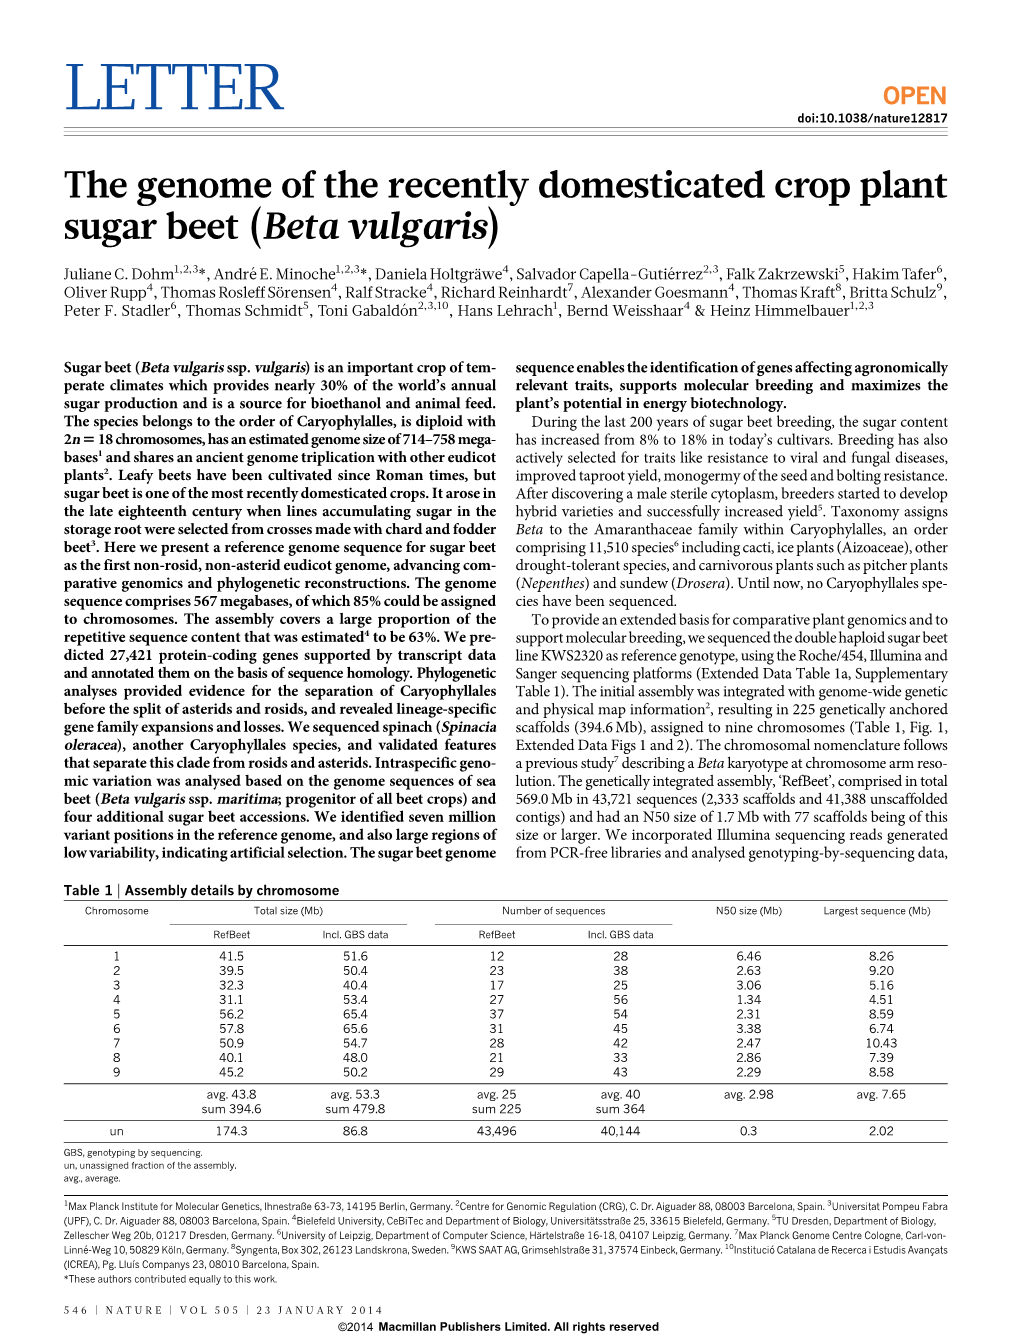 The Genome of the Recently Domesticated Crop Plant Sugar Beet (Beta Vulgaris)